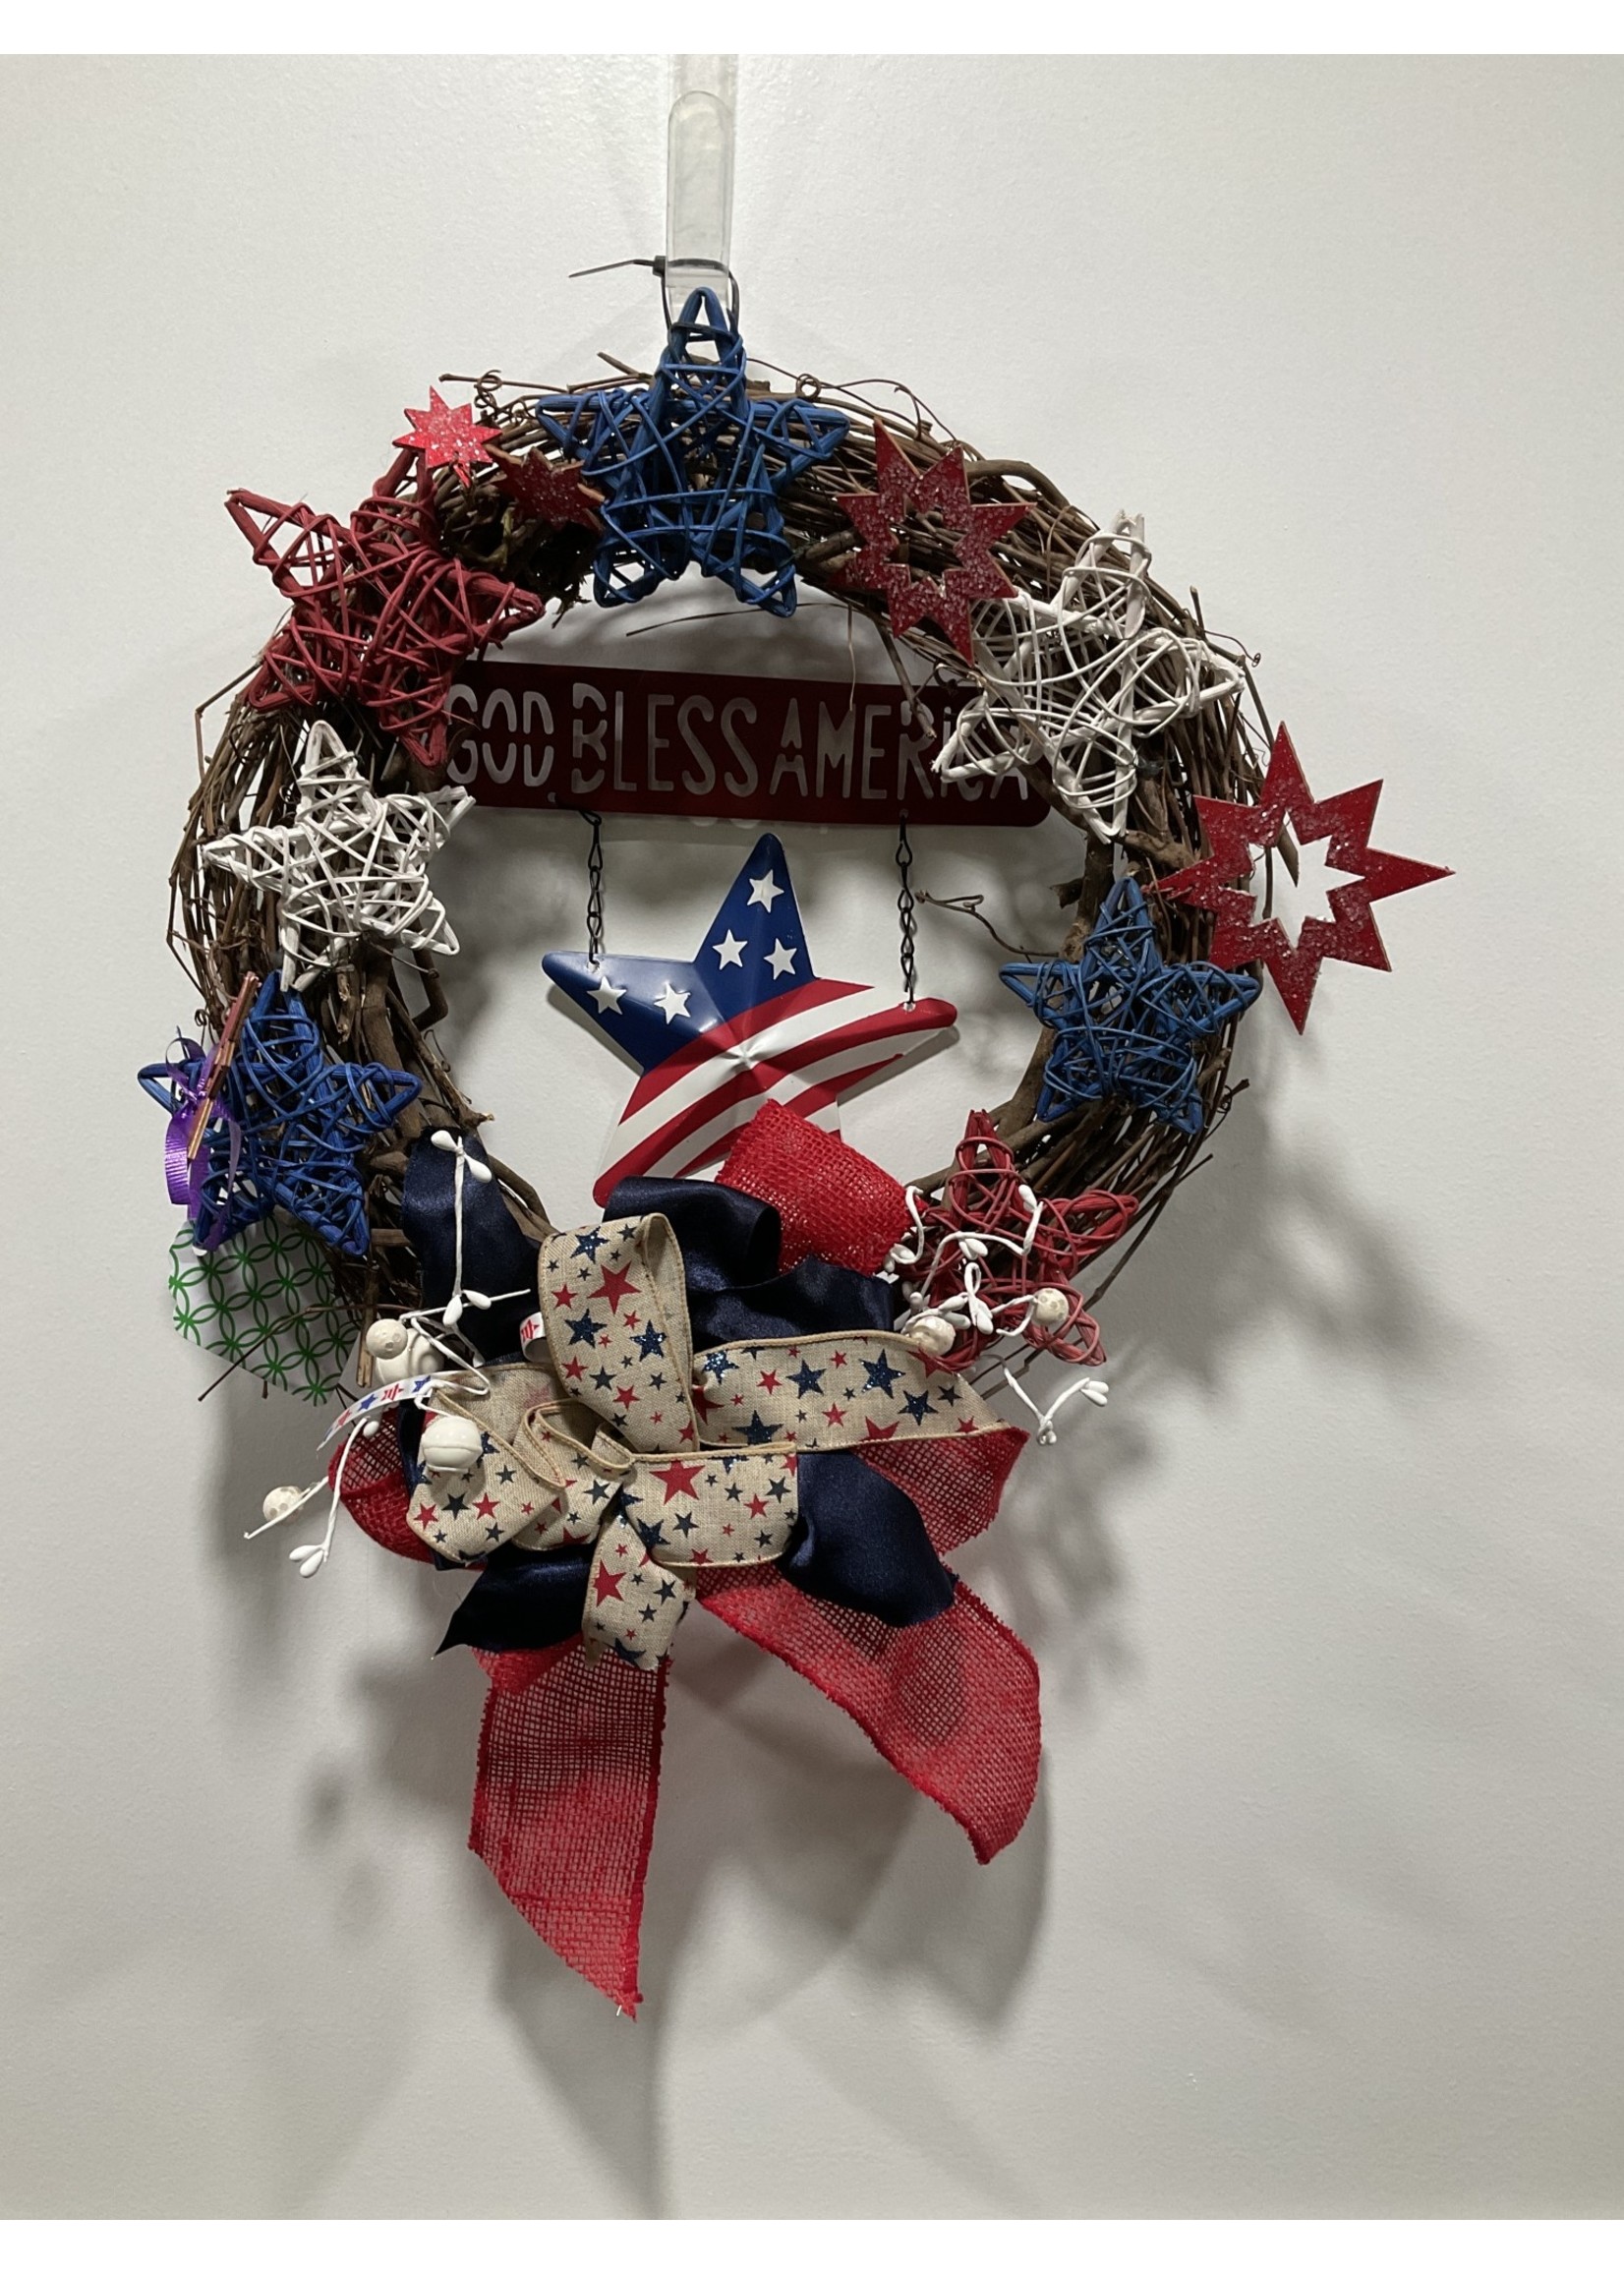 My New Favorite Thing 1235 Wreath Grapevine 16 in-"God Bless America" w/Stars and Patriotic Ribbon